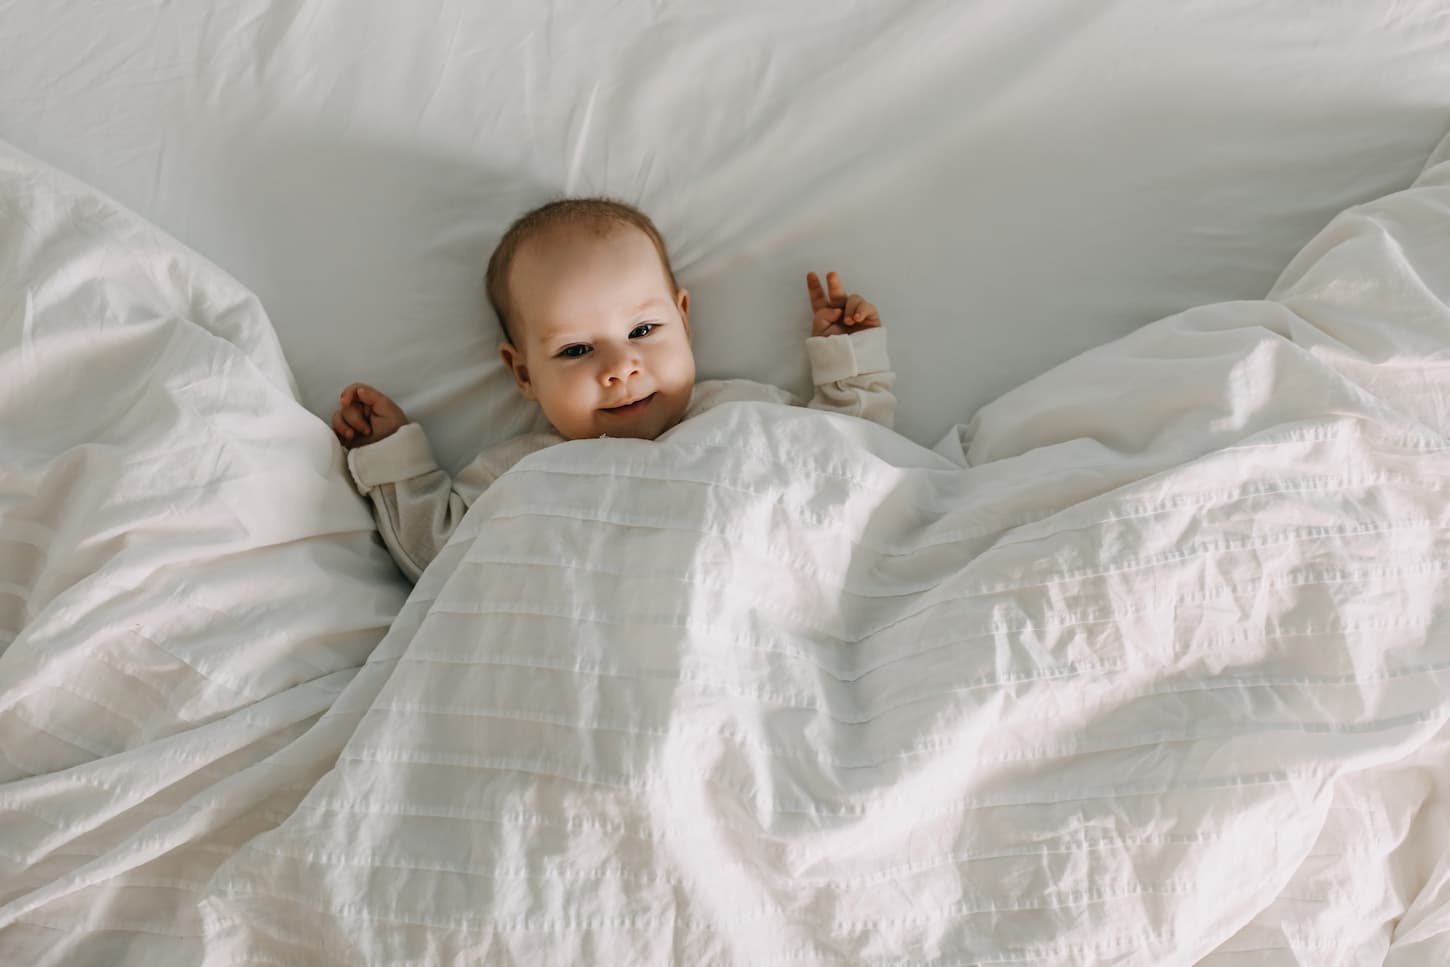 An image of a Happy baby lying in bed under a white soft blanket, smiling.